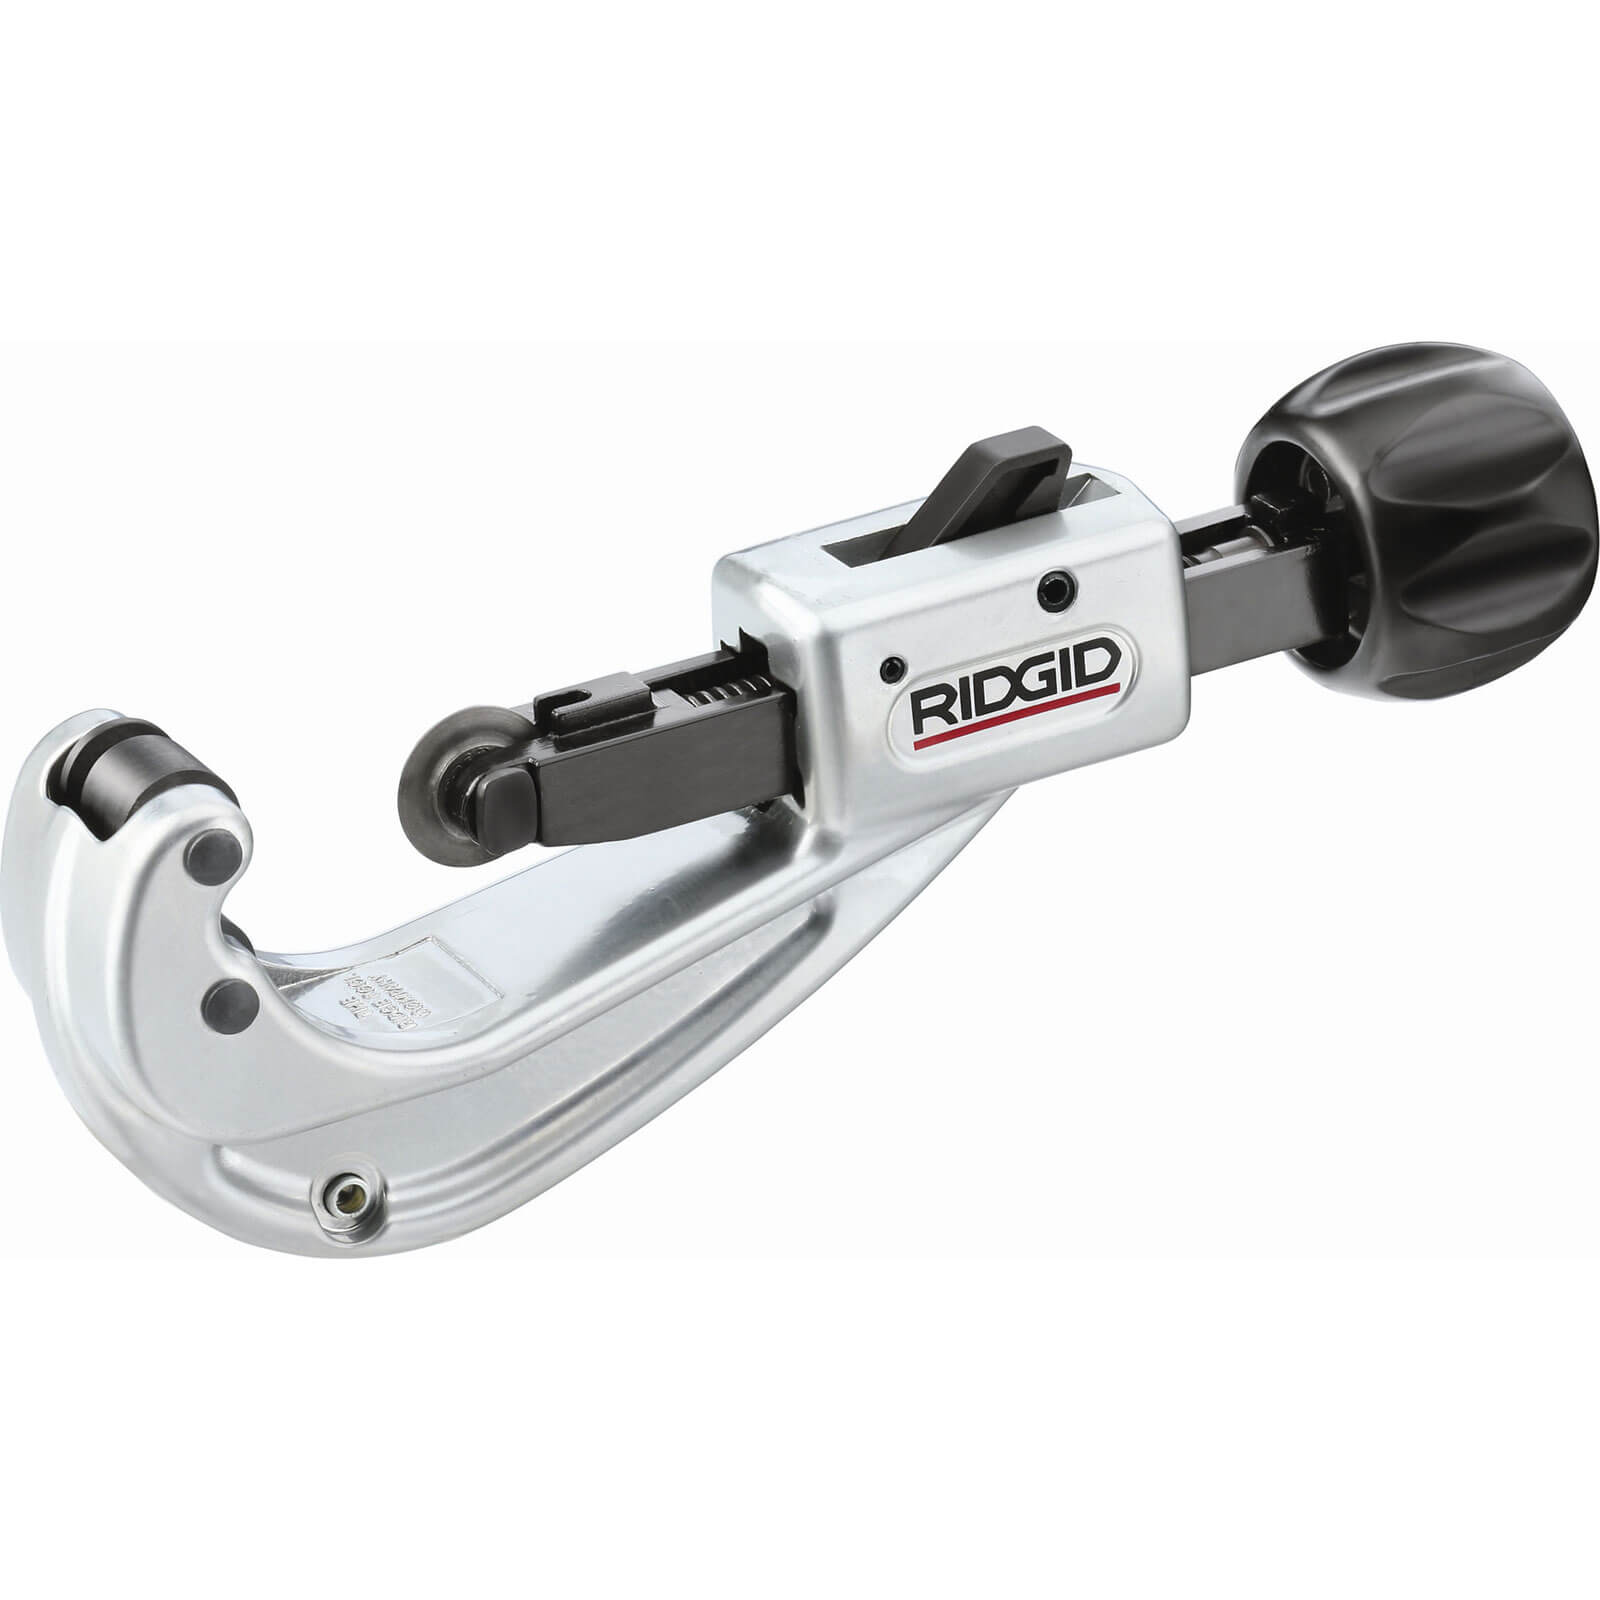 Photo of Ridgid Quick Acting Platic Pipe Cutter 110-160mm